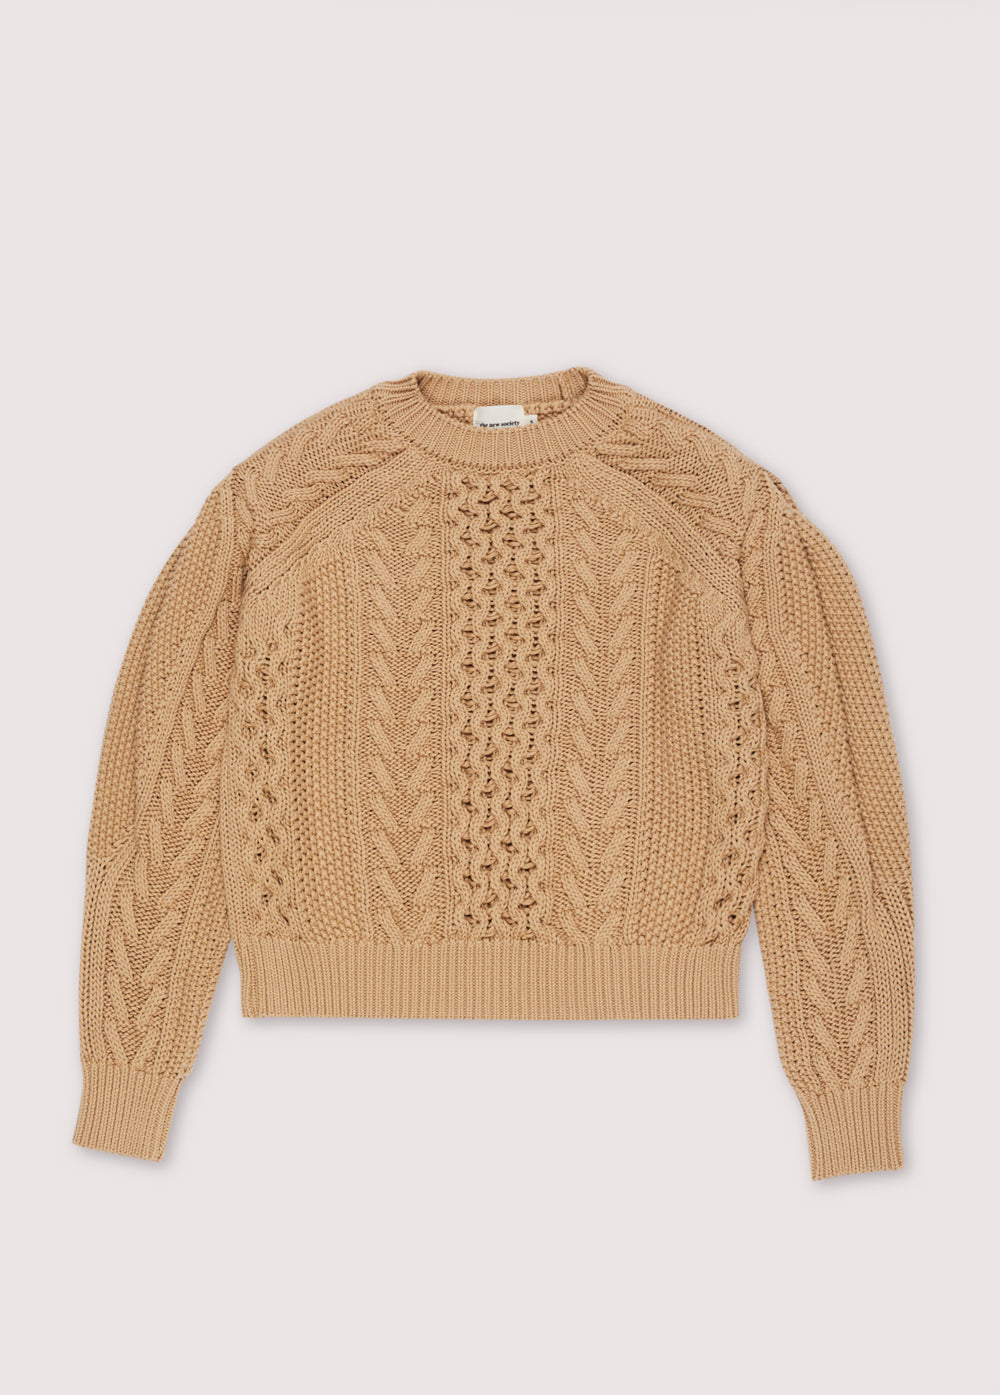 Russel Woman Cable Sleeve Jumper Desert Sand